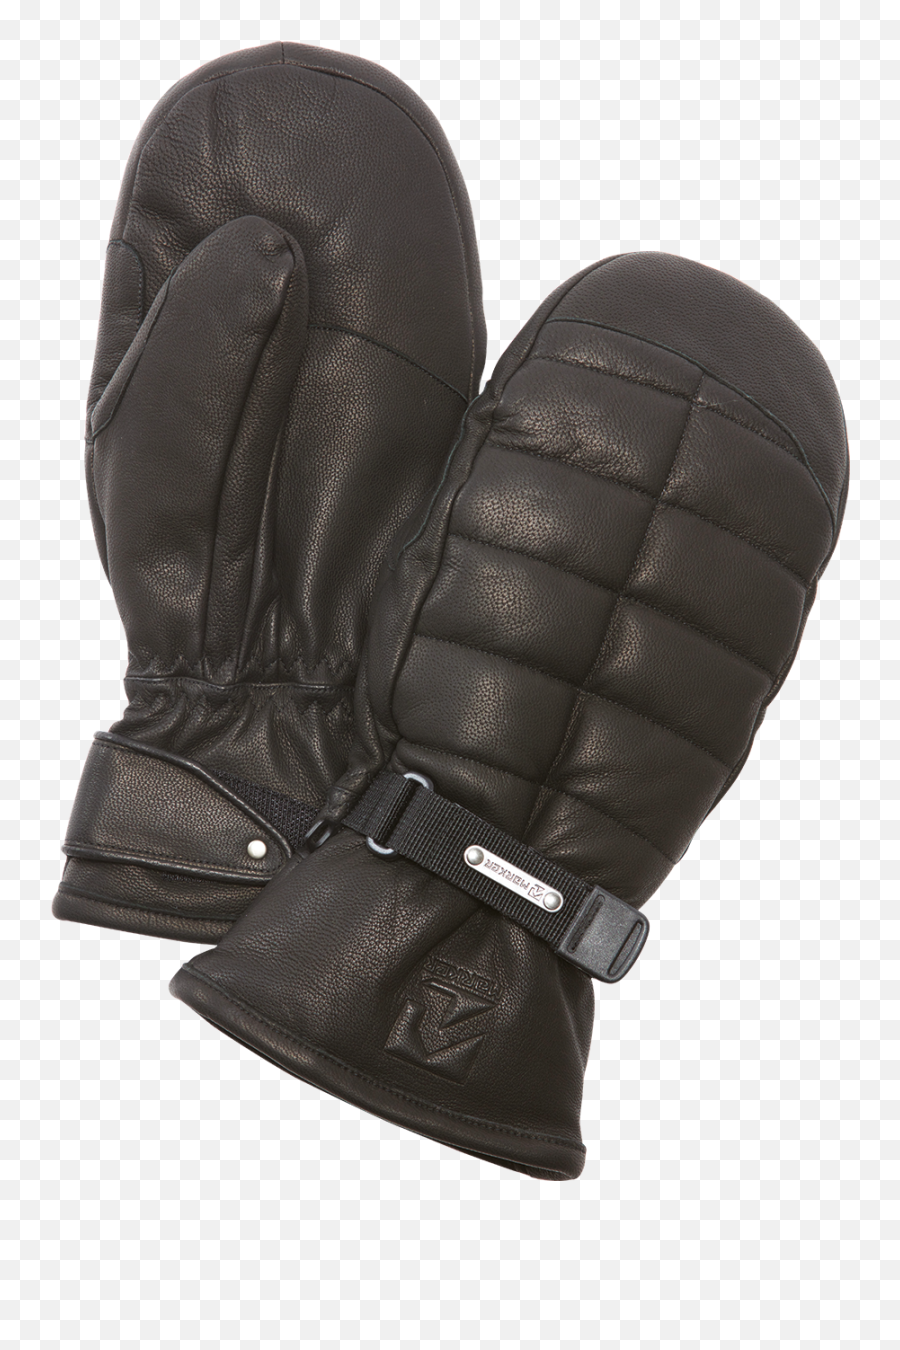 Luxury Mitten - Boxing Glove Png,Boxing Glove Png